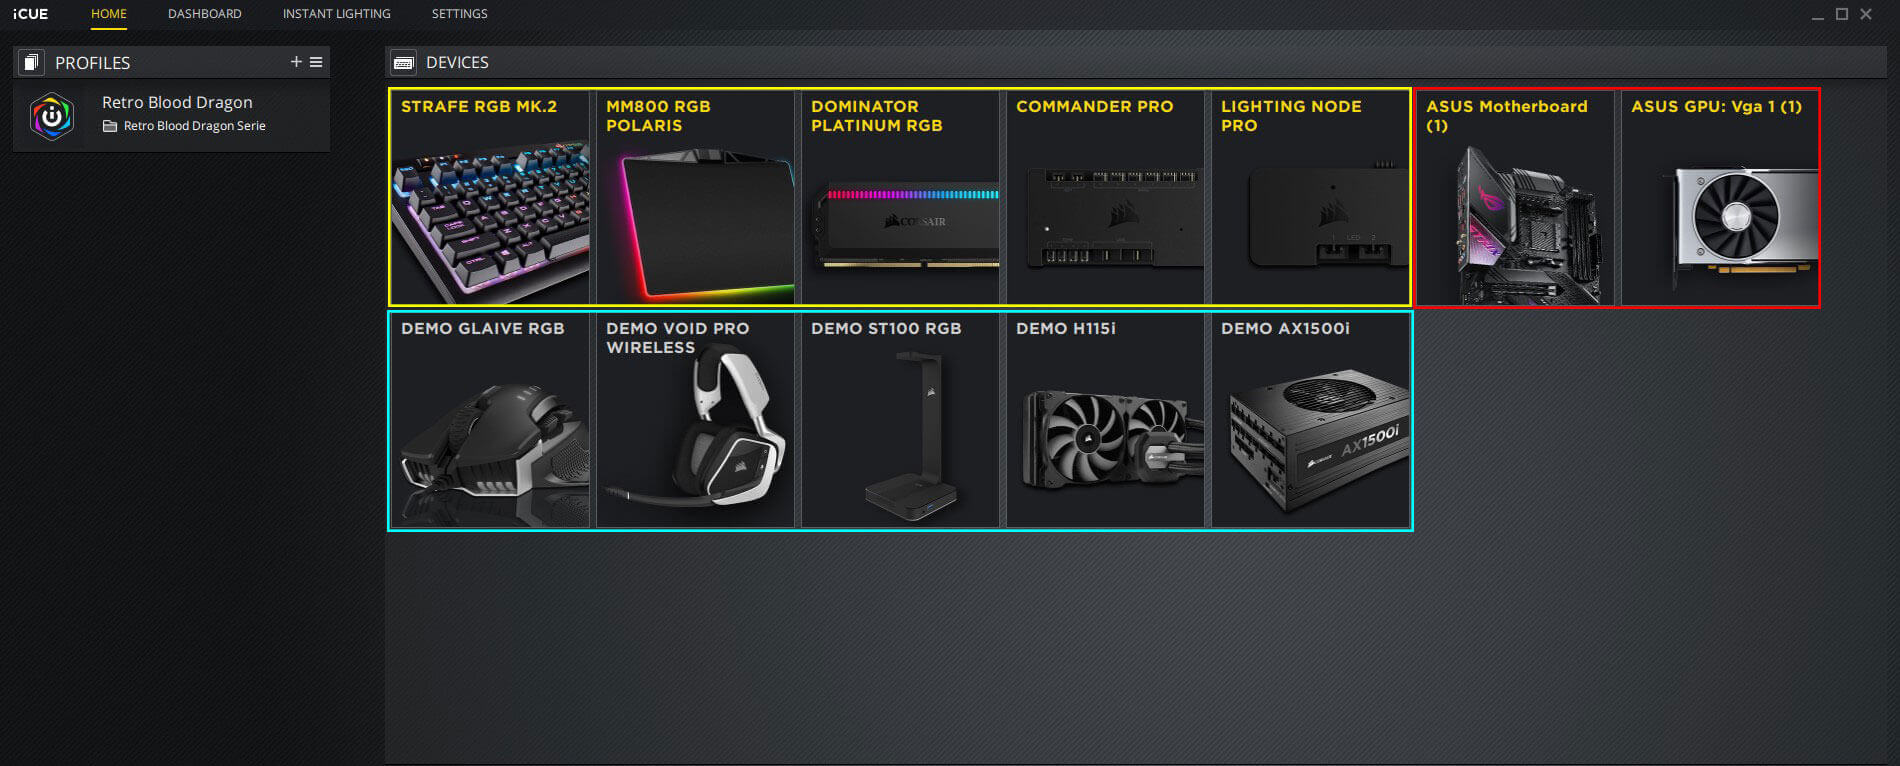 Connected devices from Corsair and ASUS in iCue